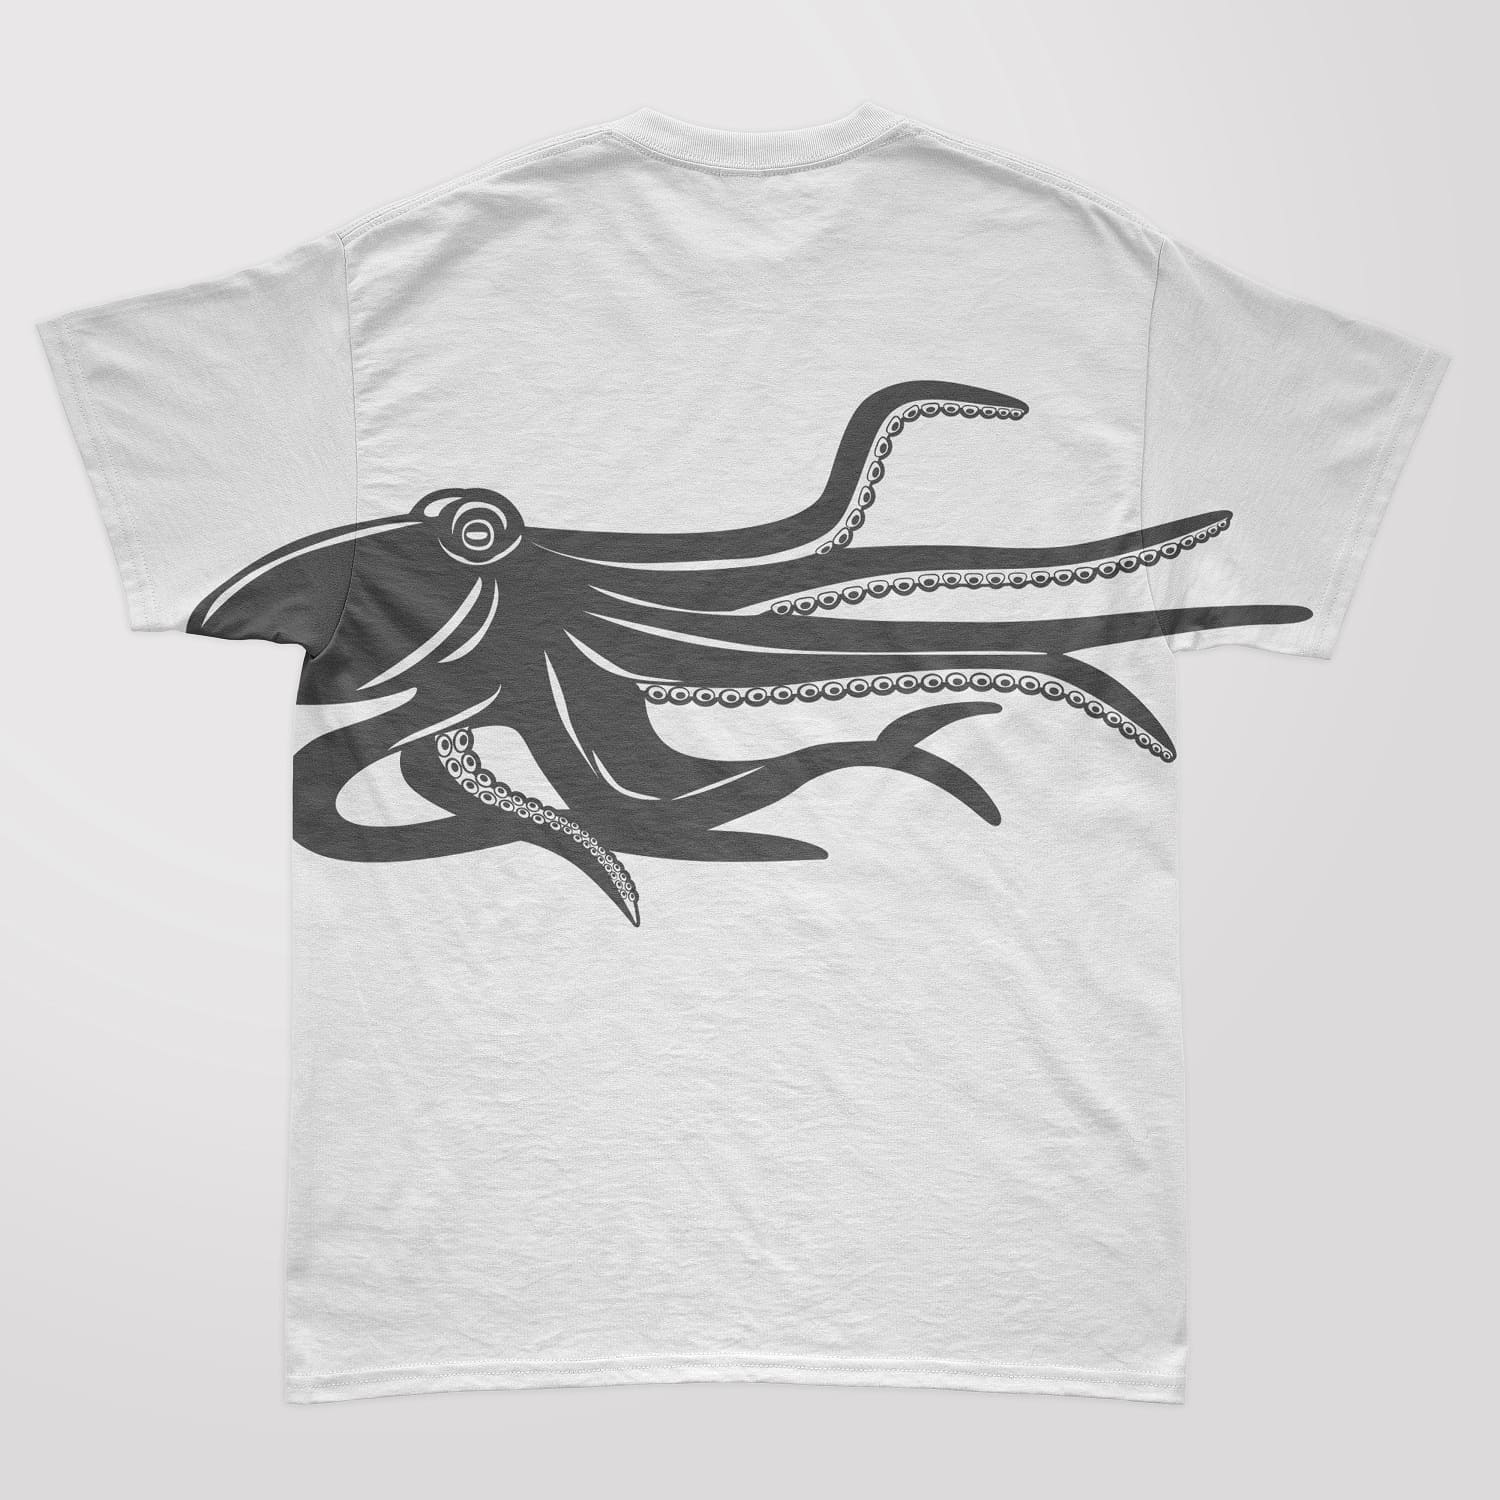 White plain t-shirt with a gray print of an octopus silhouette on a white background.